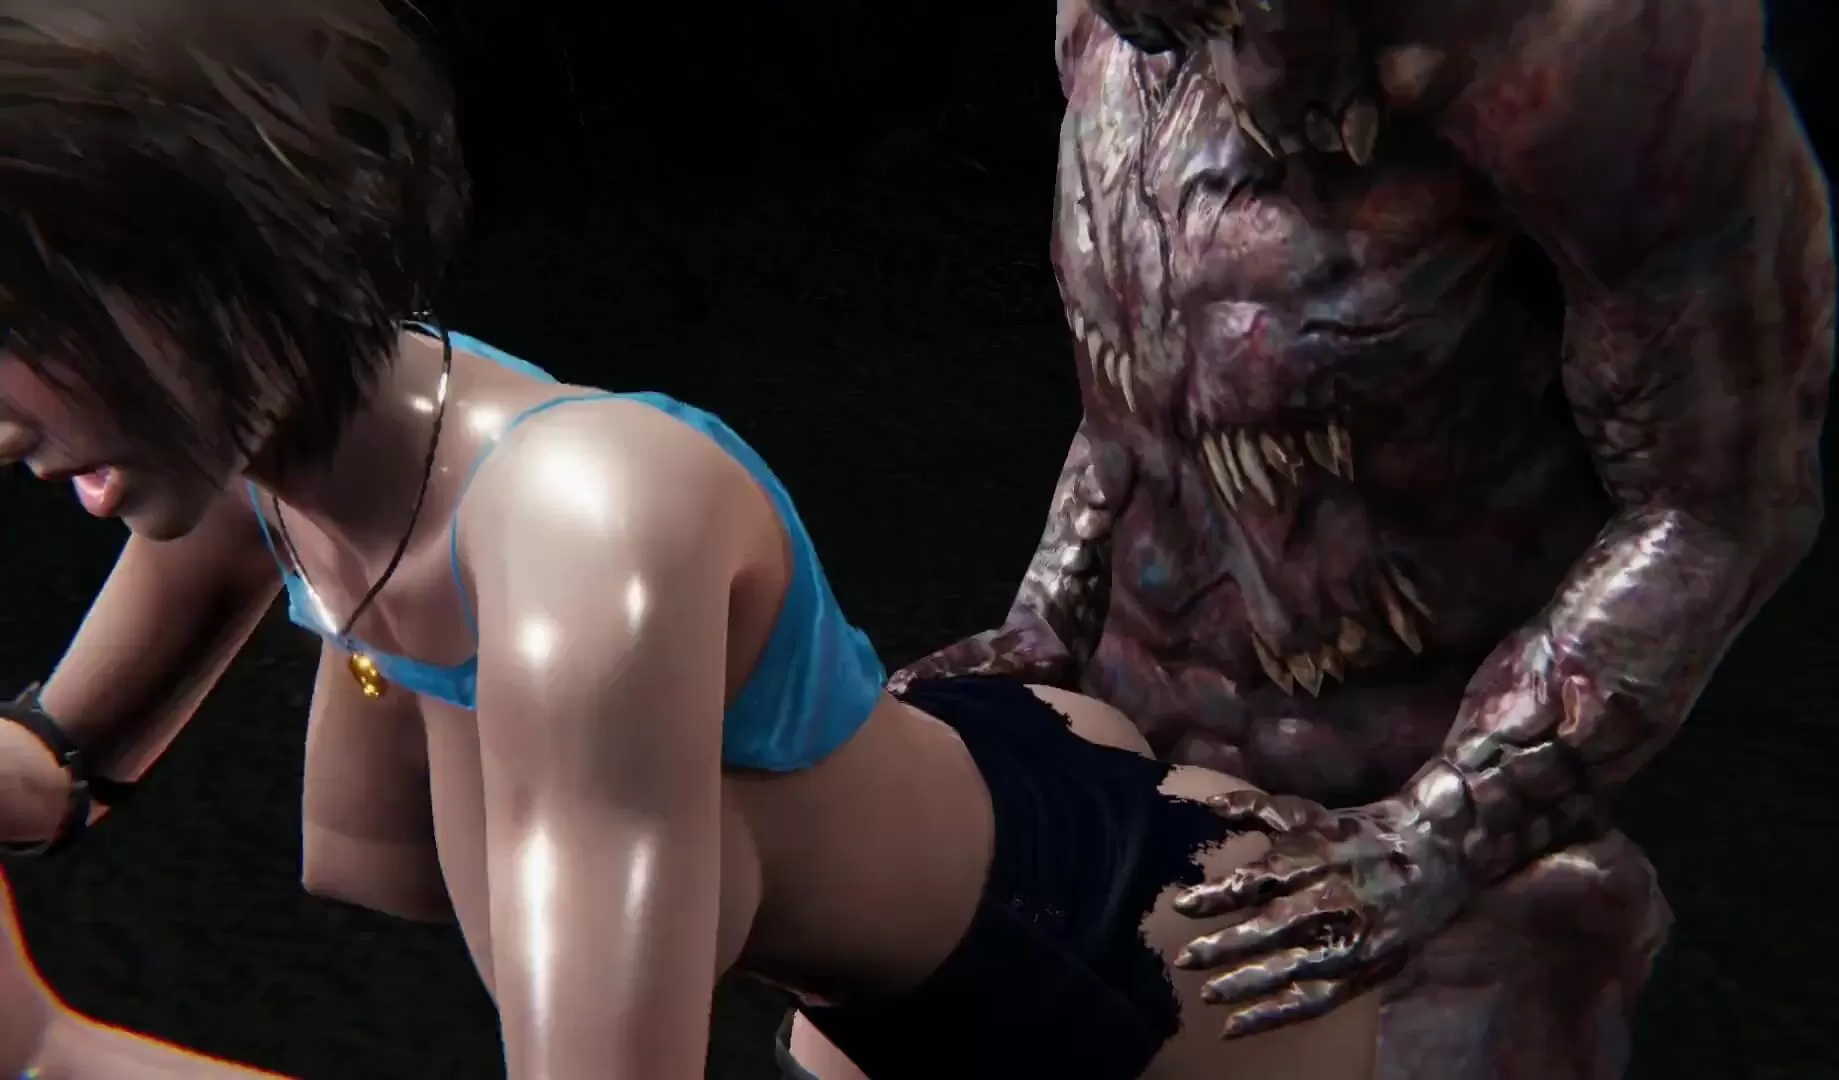 Resident Evil Anal Porn - Jill Valentine Resident Evil Anal Zombie Fuck and Deepthroat, ATM,  Squirting 3D Hentai watch online